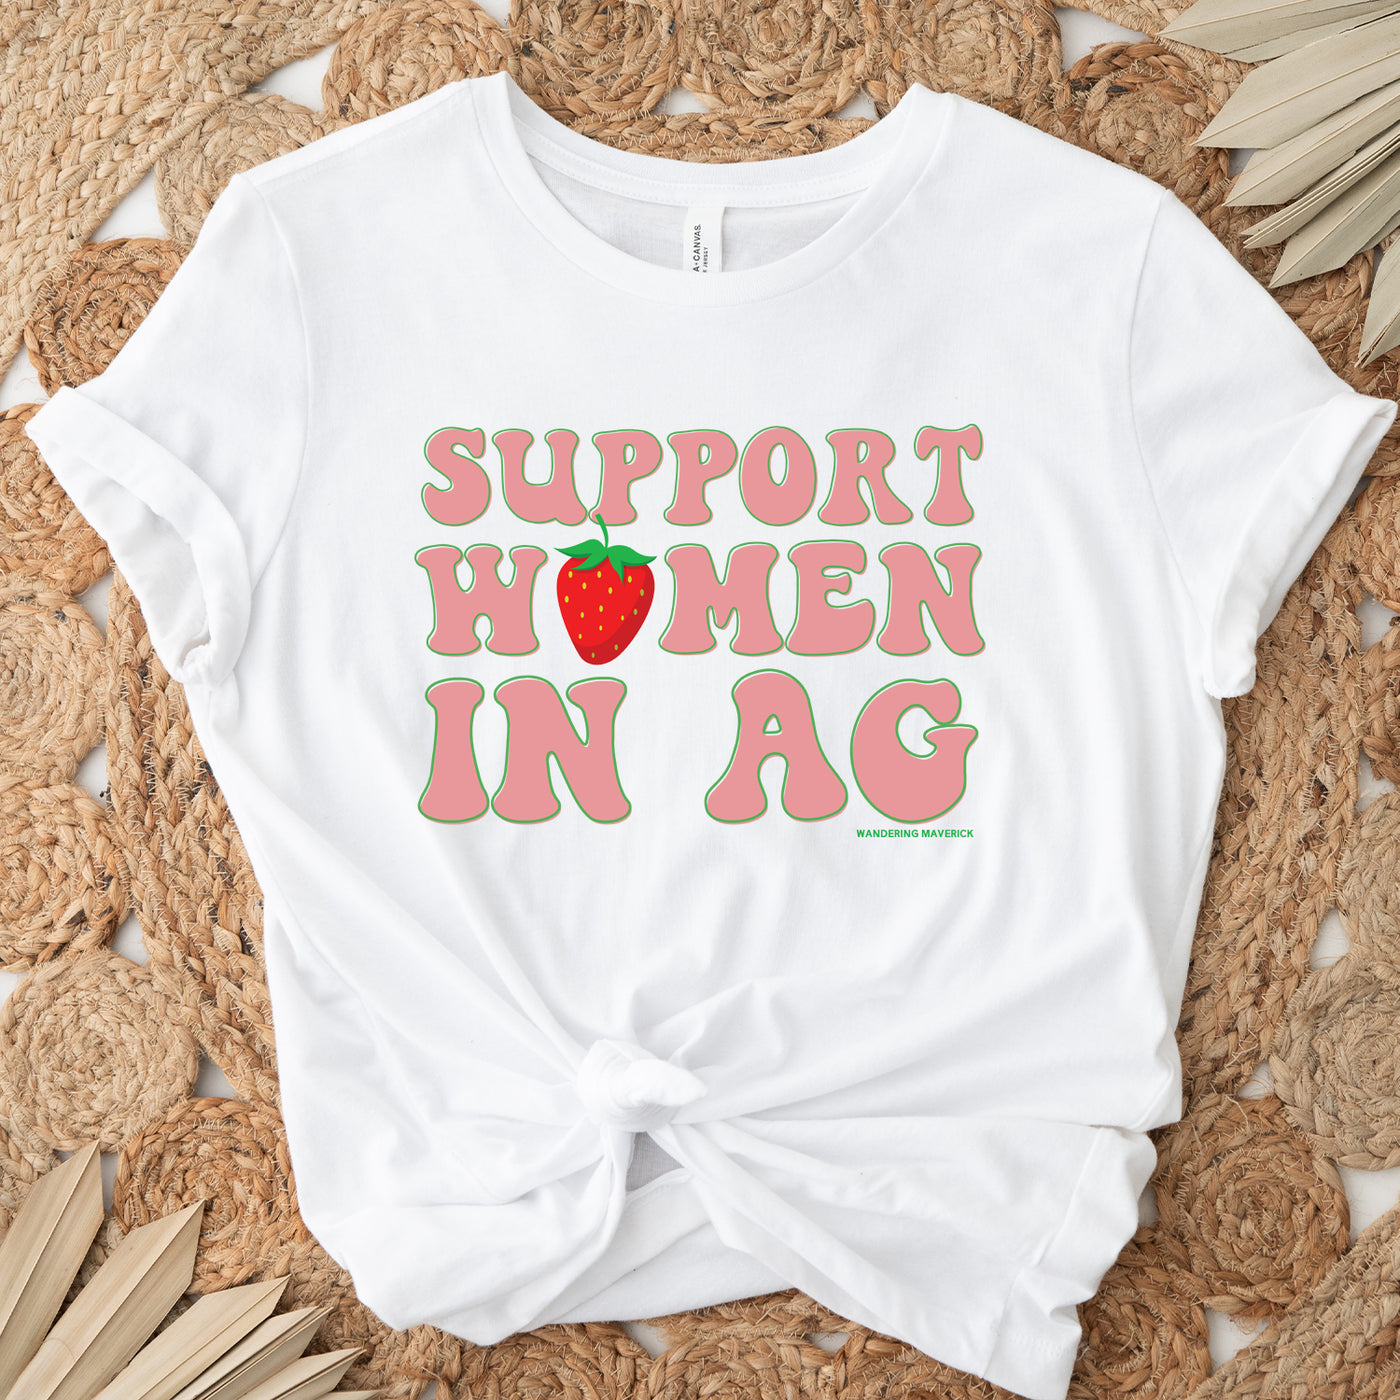 Strawberry Support Women In Ag T-Shirt (XS-4XL) - Multiple Colors!